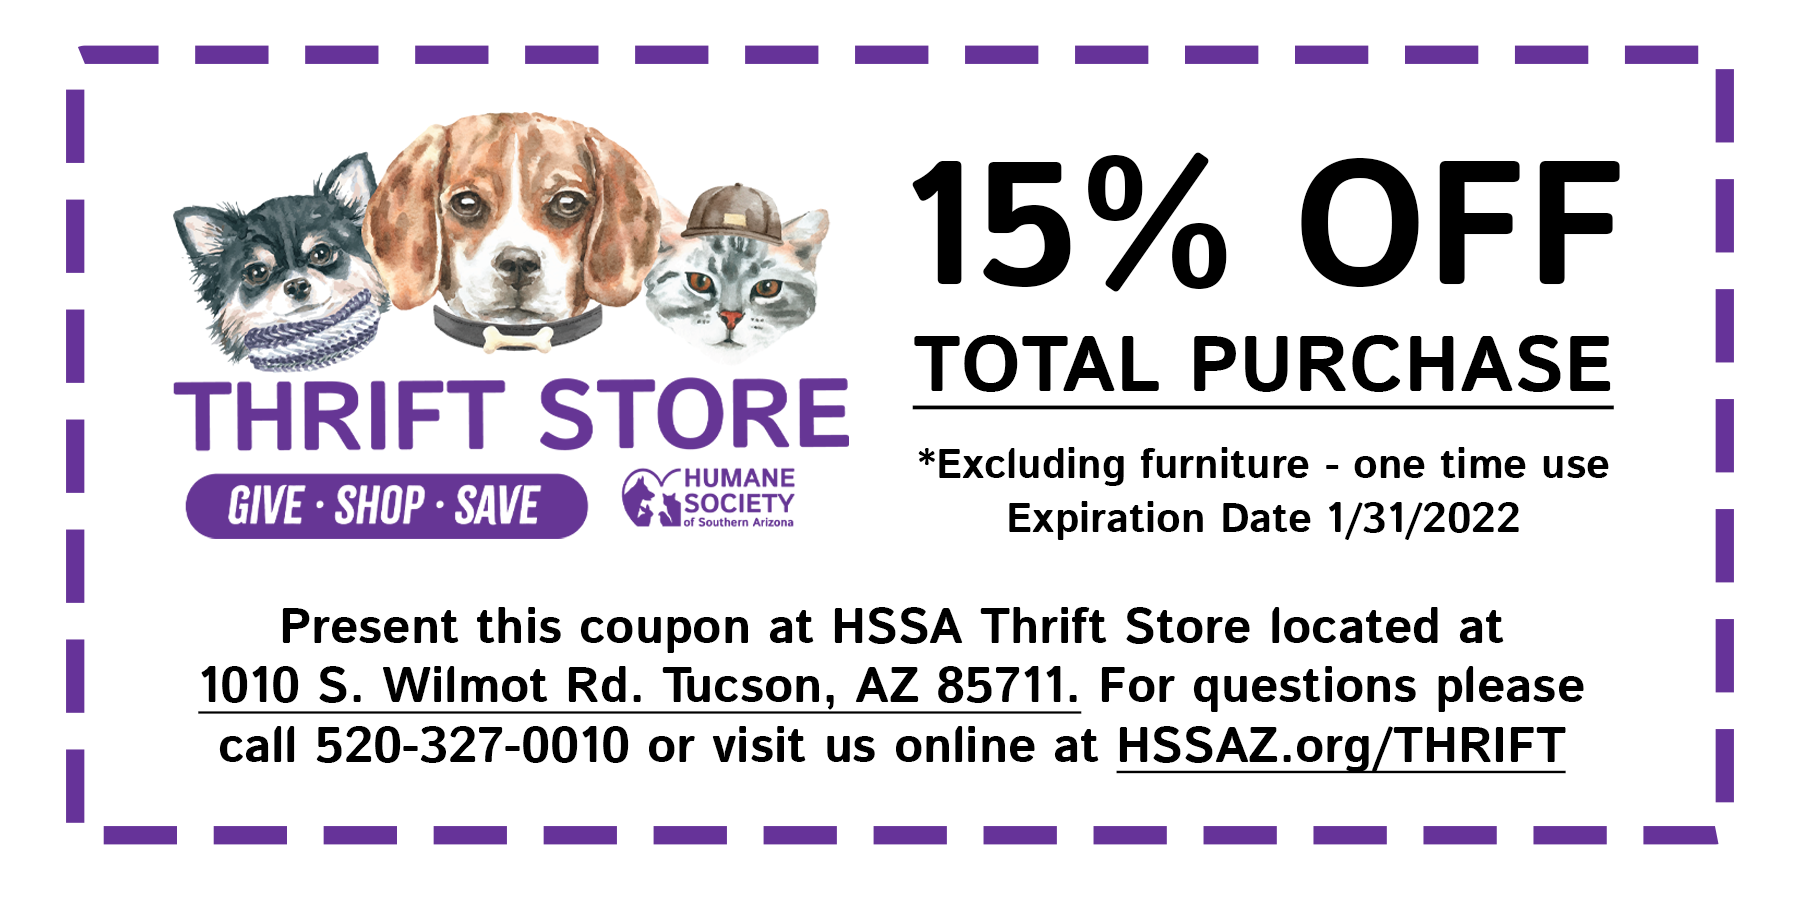 Thrift Store 15% off coupon 2021